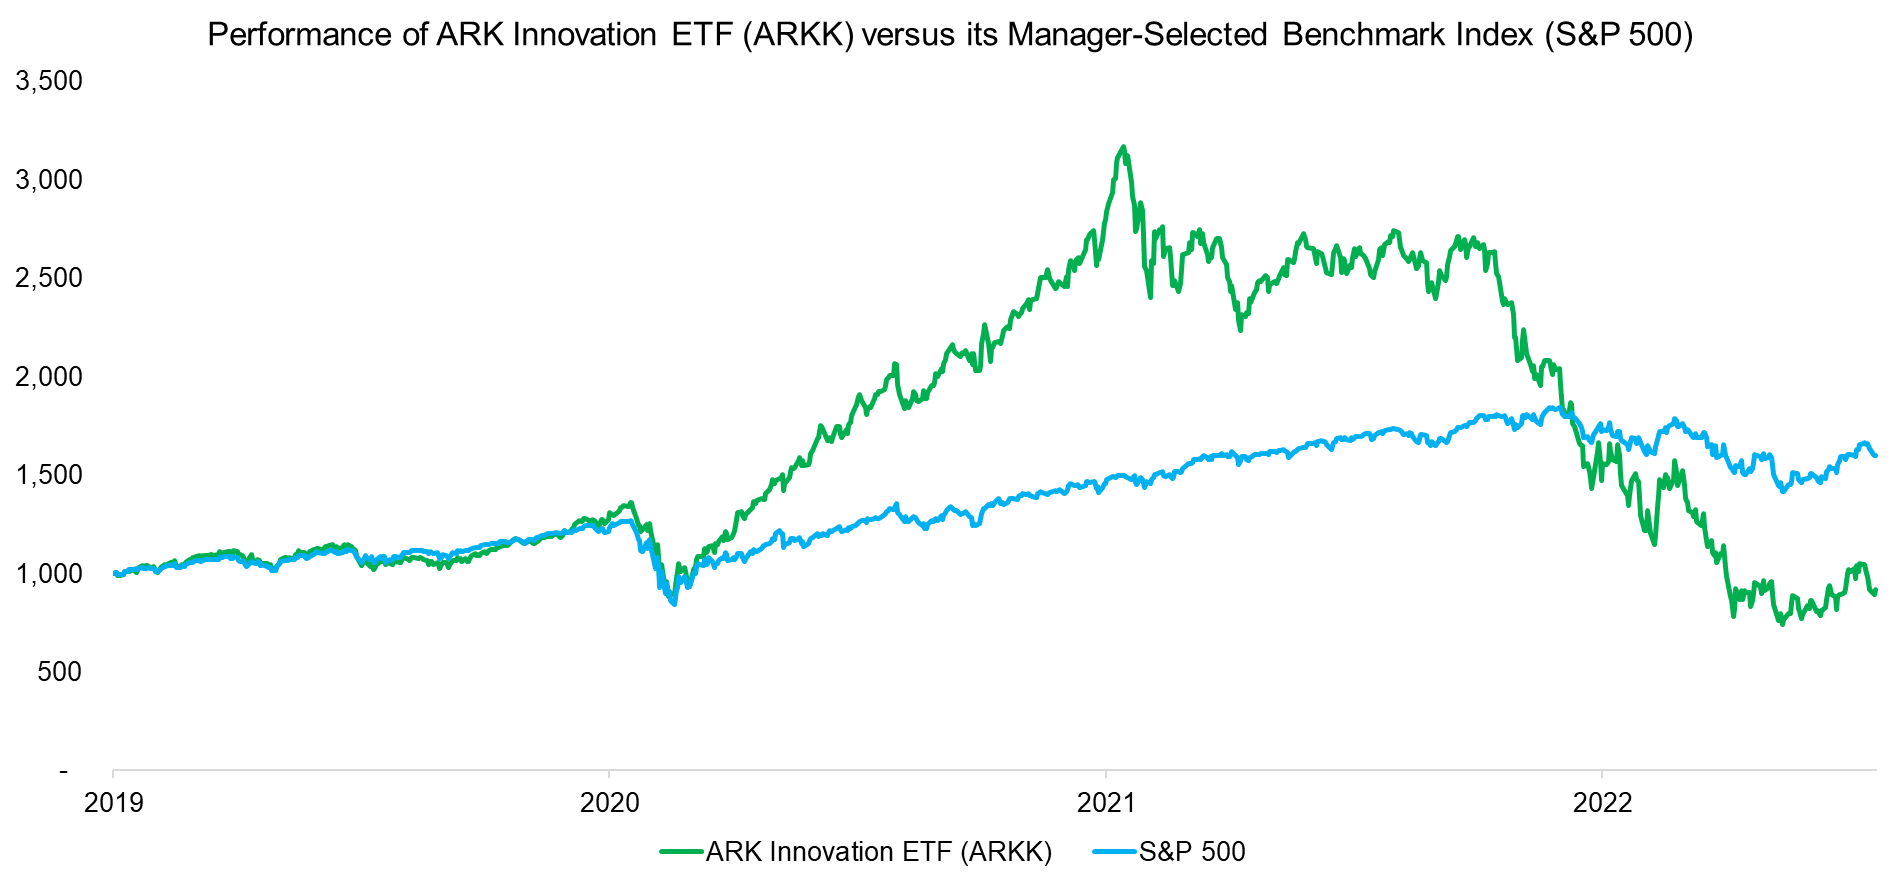 Performance of ARK Innovation ETF (ARKK) versus its Manager-Selected Benchmark Index (S&P 500)